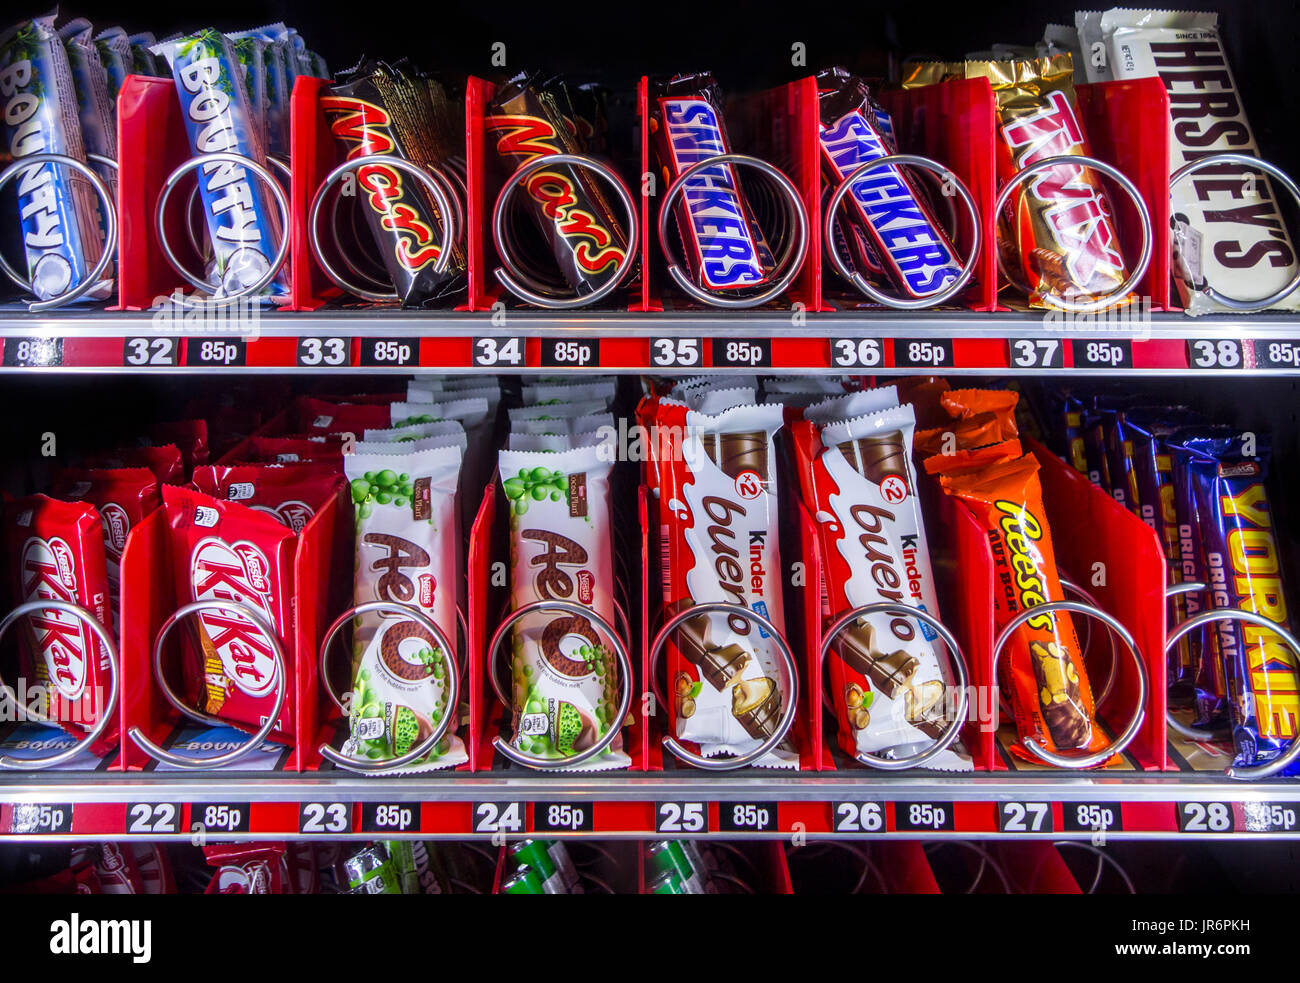 Snack vending machine / snack dispenser selling colourful sweets and chocolate bars in public place Stock Photo